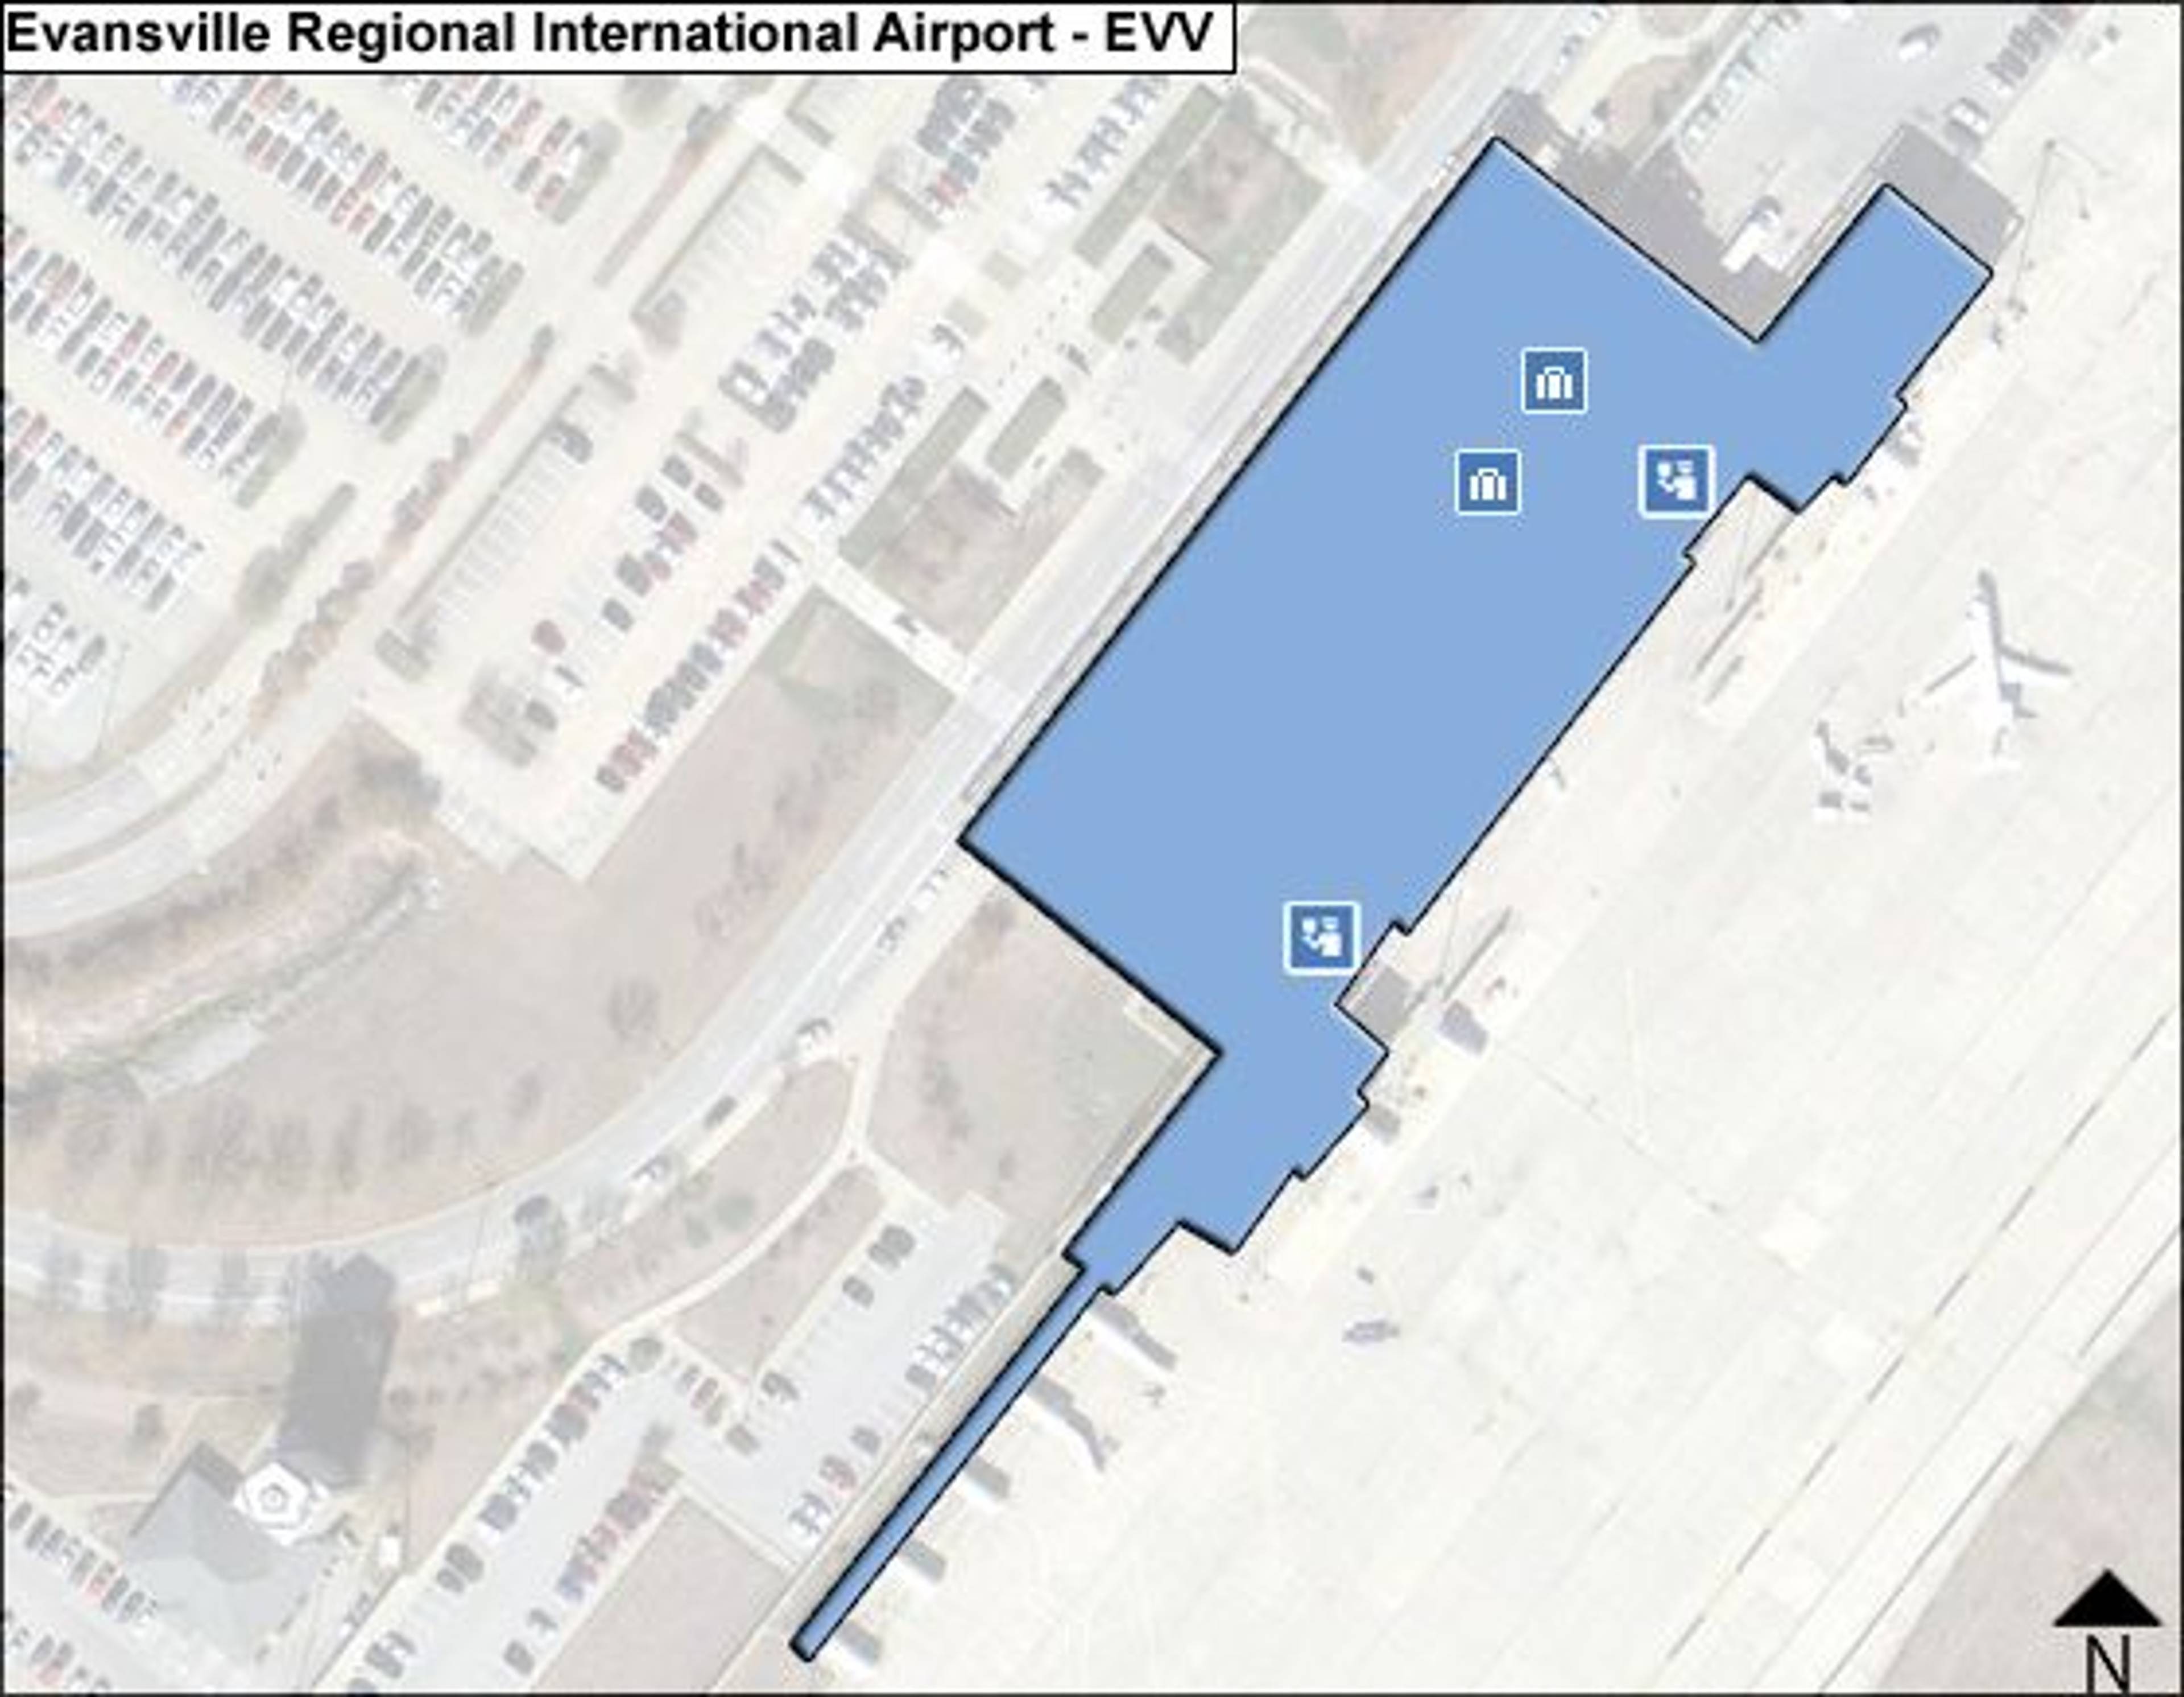 Evansville Airport Overview Map